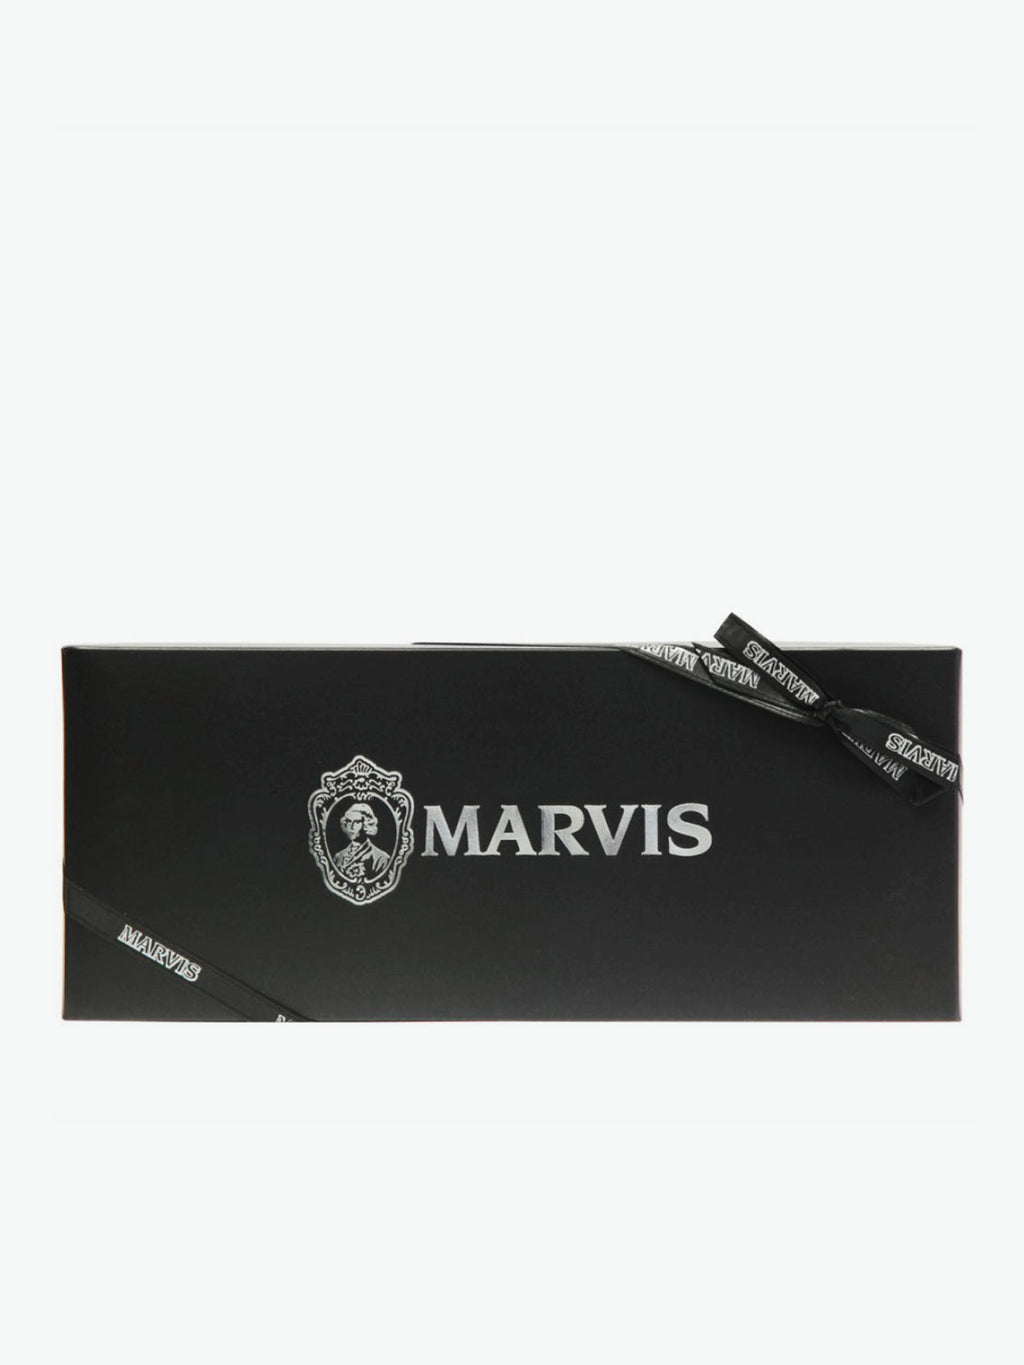 Marvis Toothpaste Black Box Collection | A